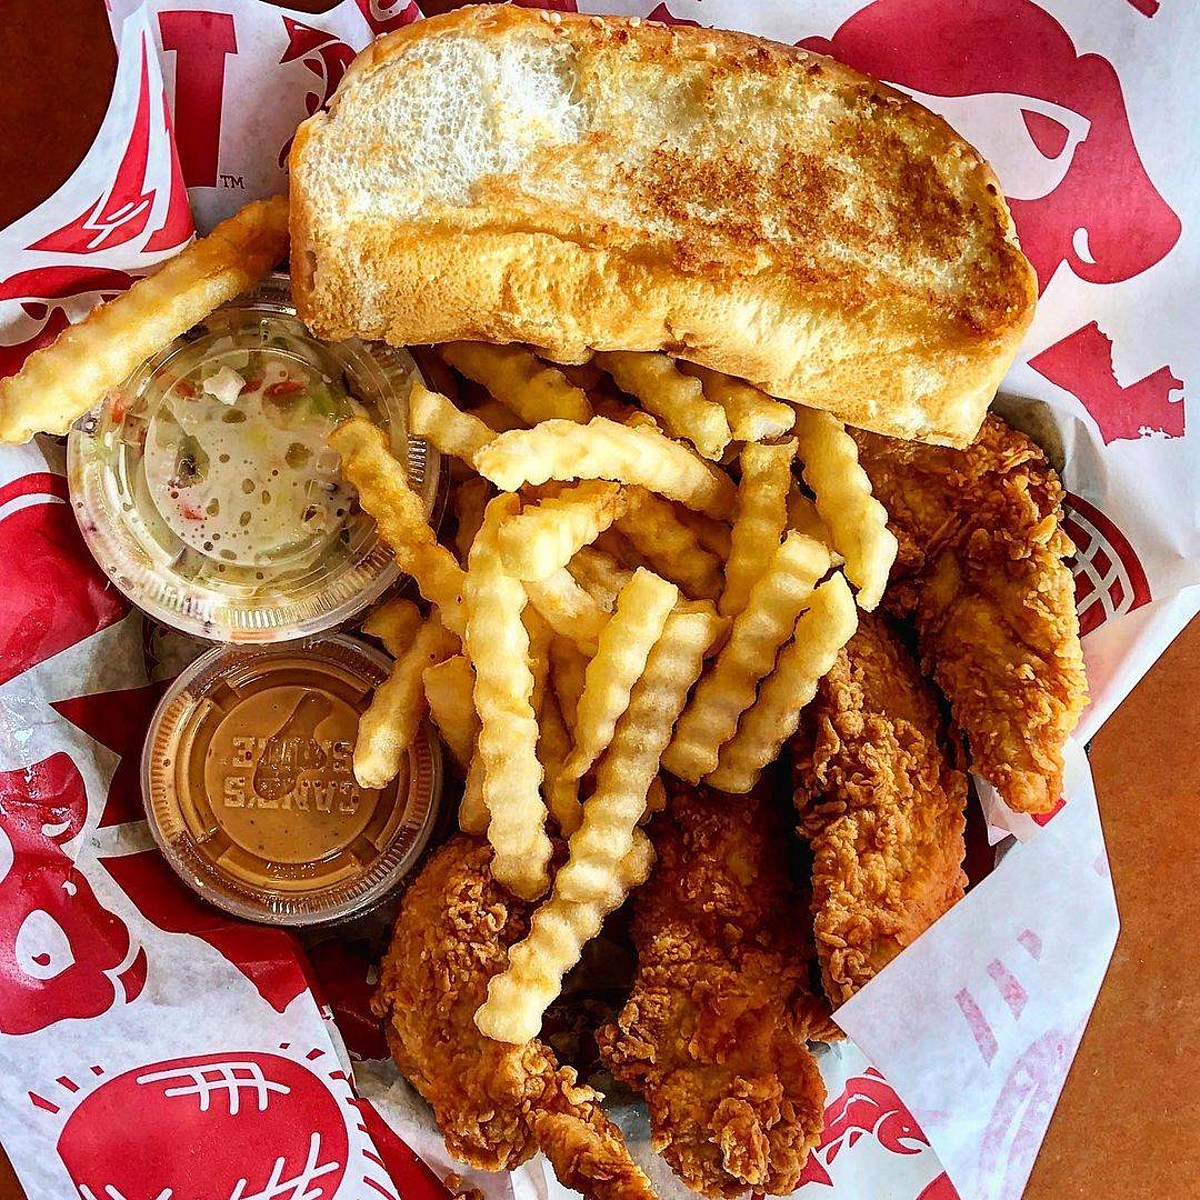 This Popular Chicken Chain is Coming to East Lansing